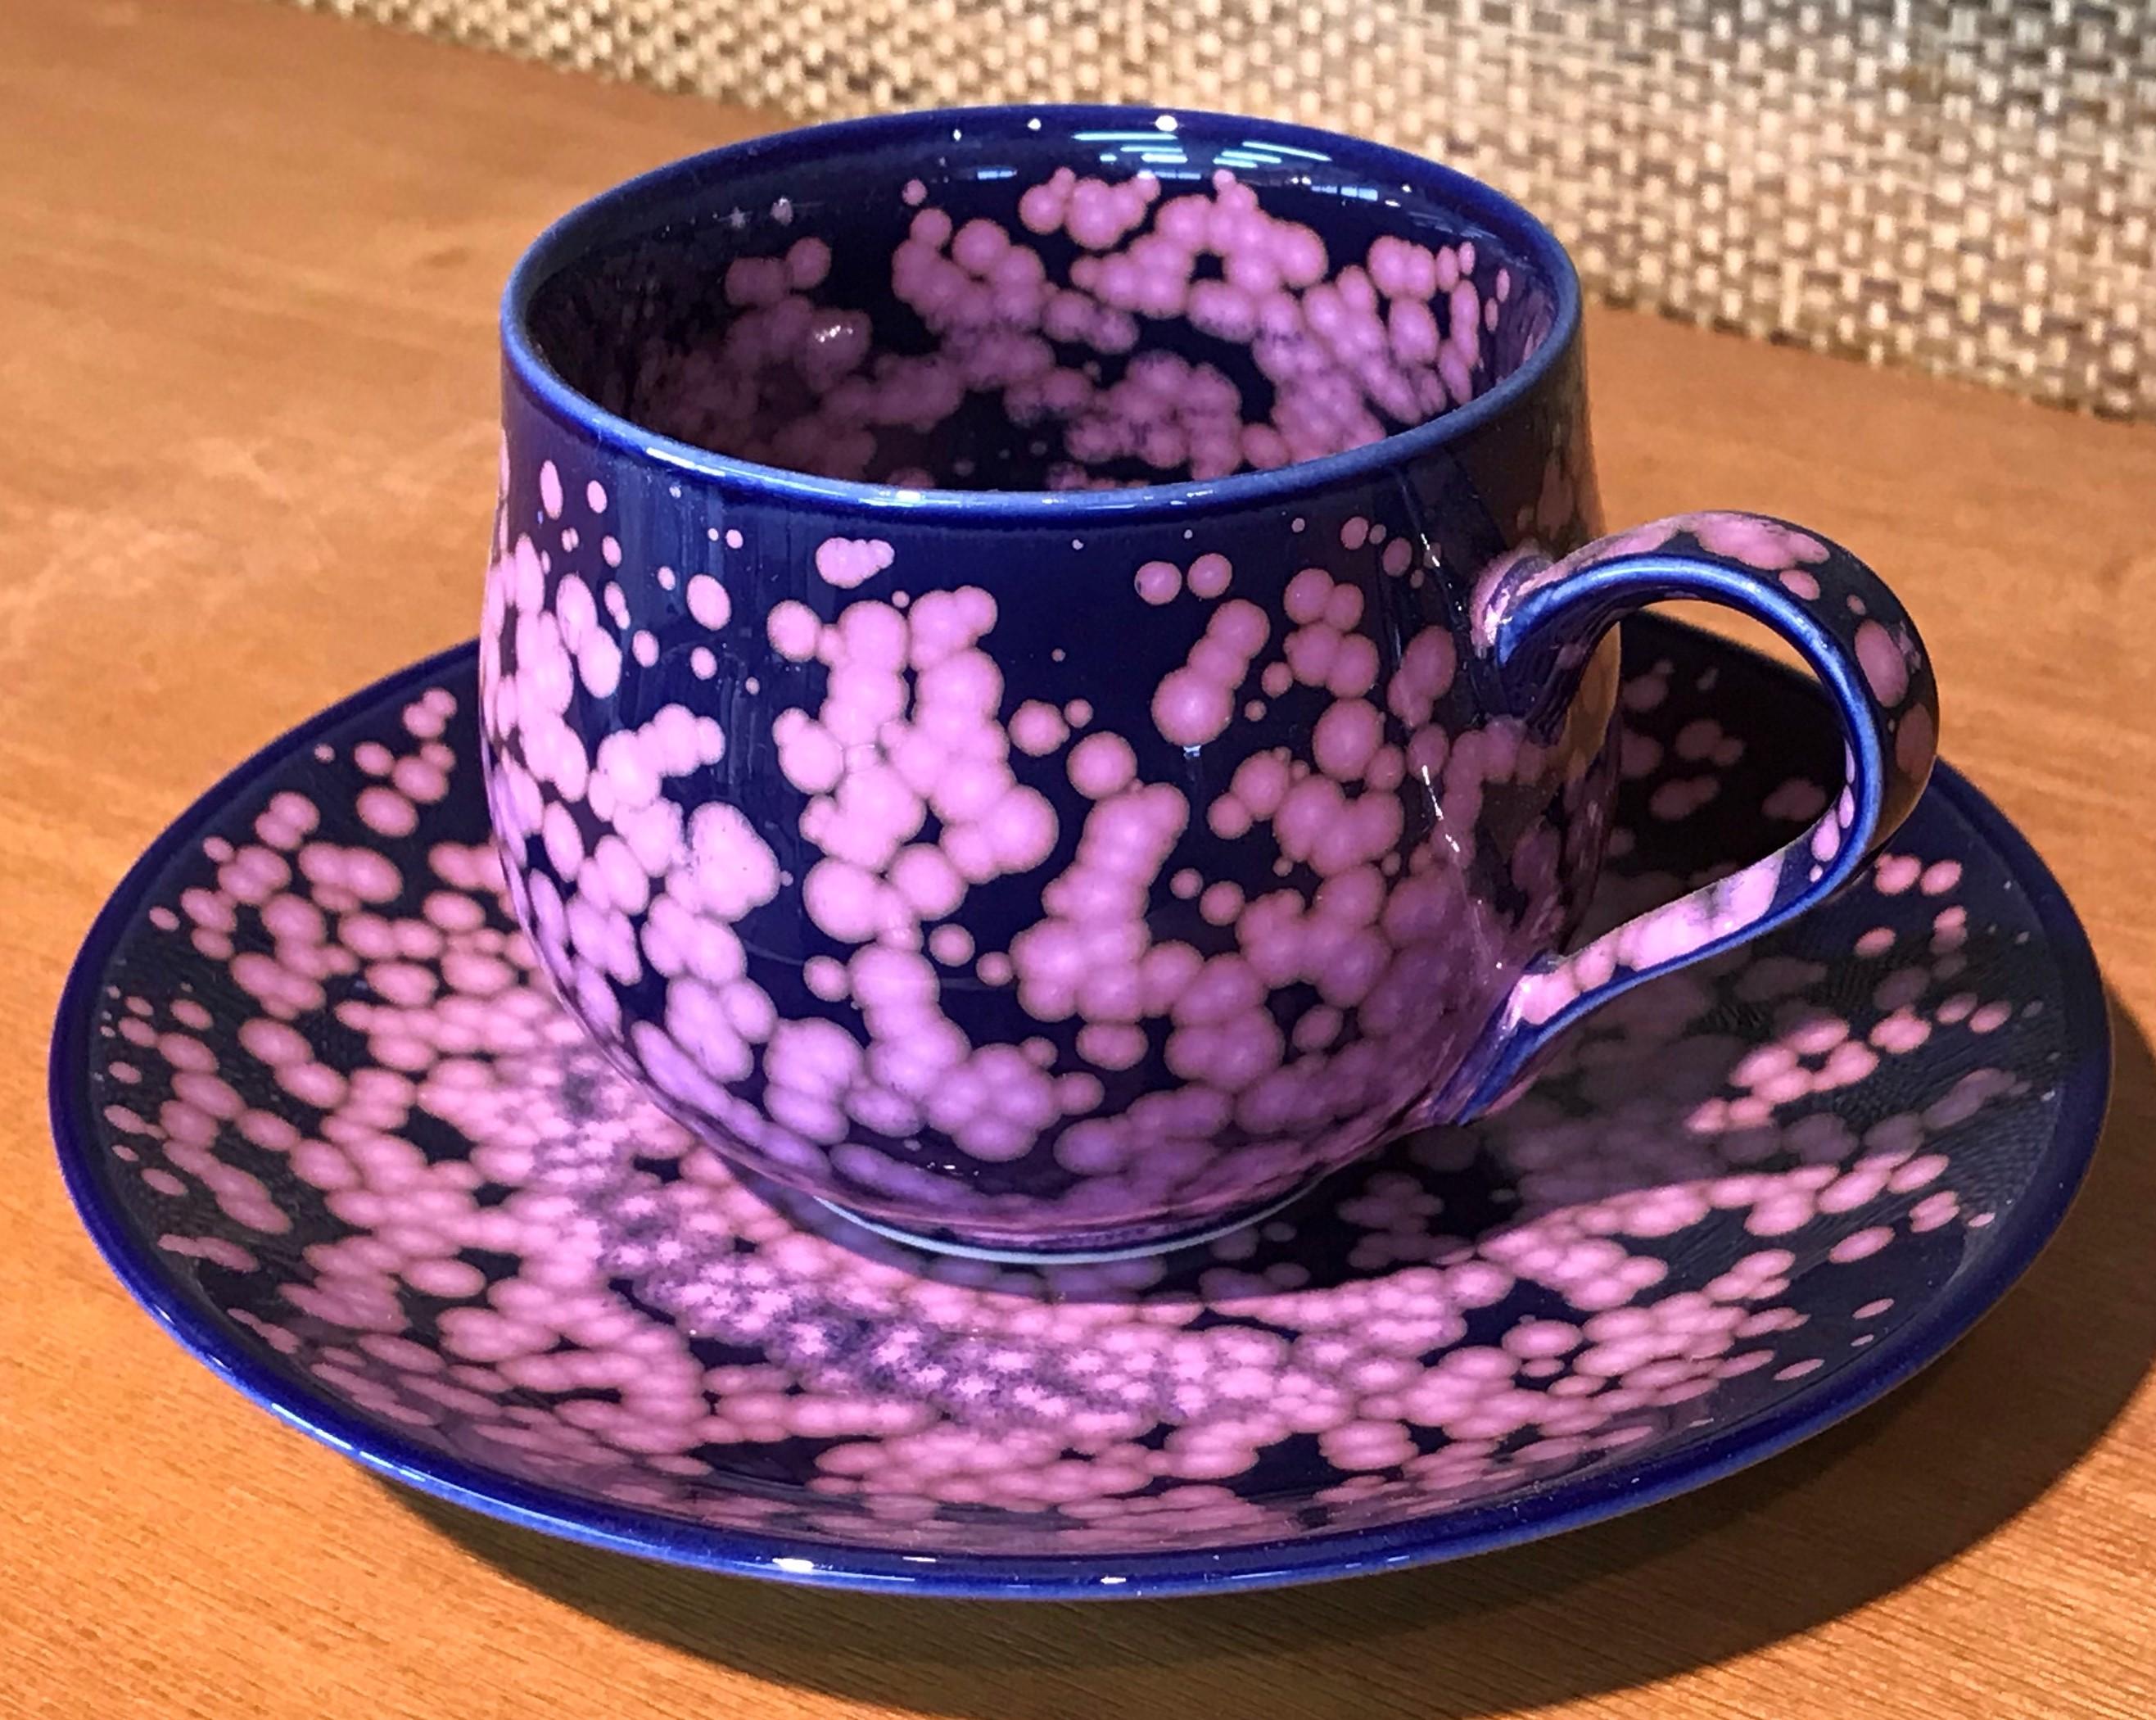 Exquisite Japanese contemporary porcelain cup and saucer, hand-glazed in stunning signature pink on a beautiful dark blue background, a signed work from one of the most striking collections by highly acclaimed award-winning master porcelain artist